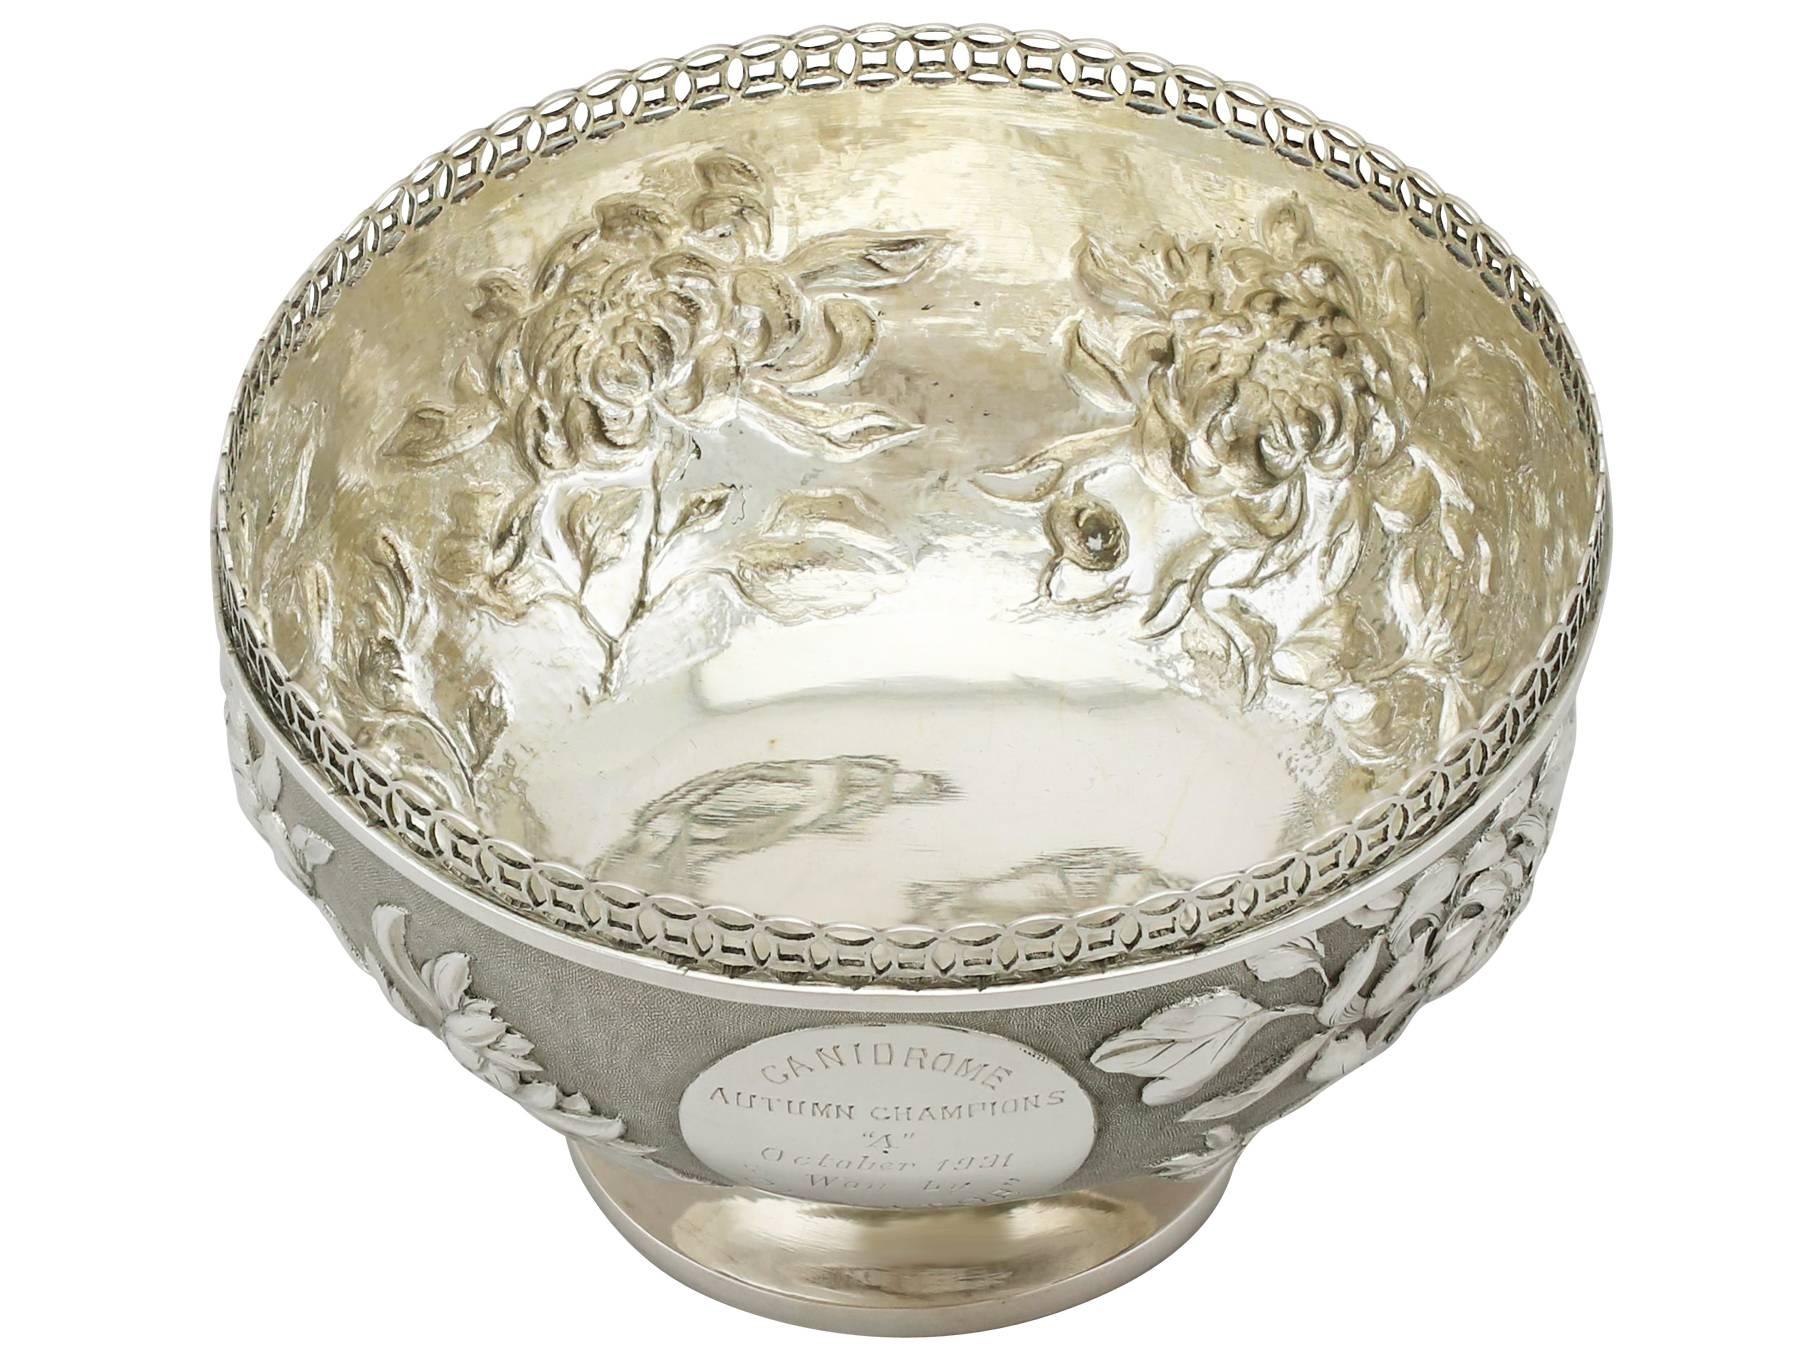 Early 20th Century Antique Chinese Export Silver Bowl, circa 1920